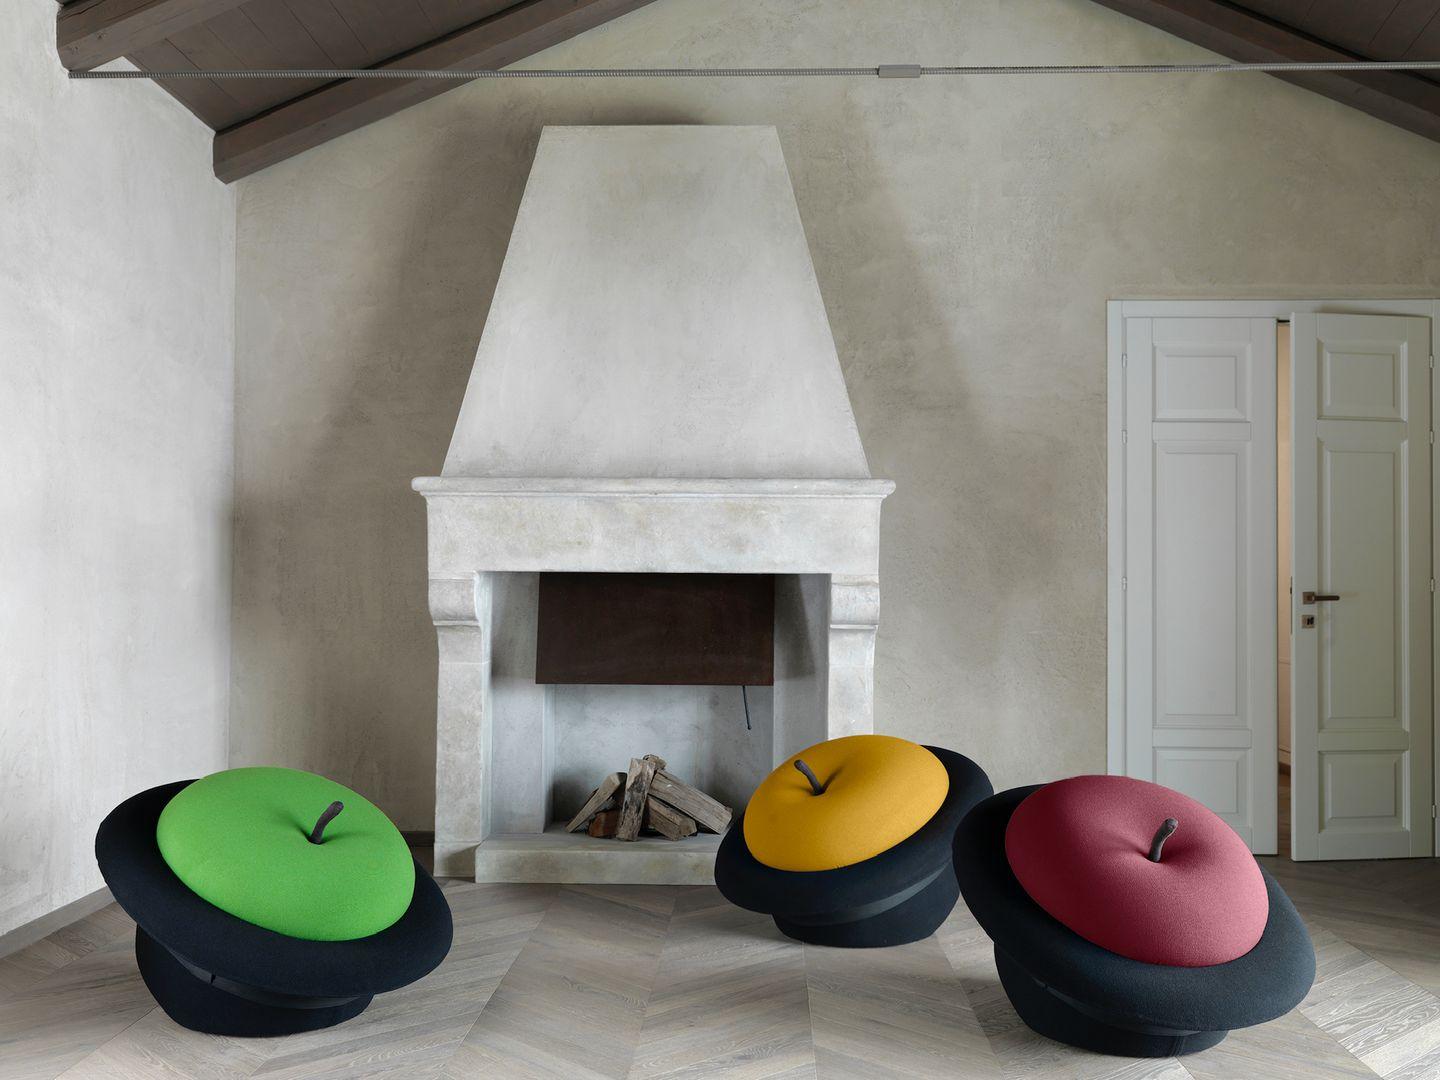 MAgriTTA is the designer's tribute to the surrealist artist René Magritte. Its shape is also a replica seat of the British bowler hat, and the surface material is faux lambskin fabric. In 1970, Roberto Sebastiàn Matta took inspiration from The Son